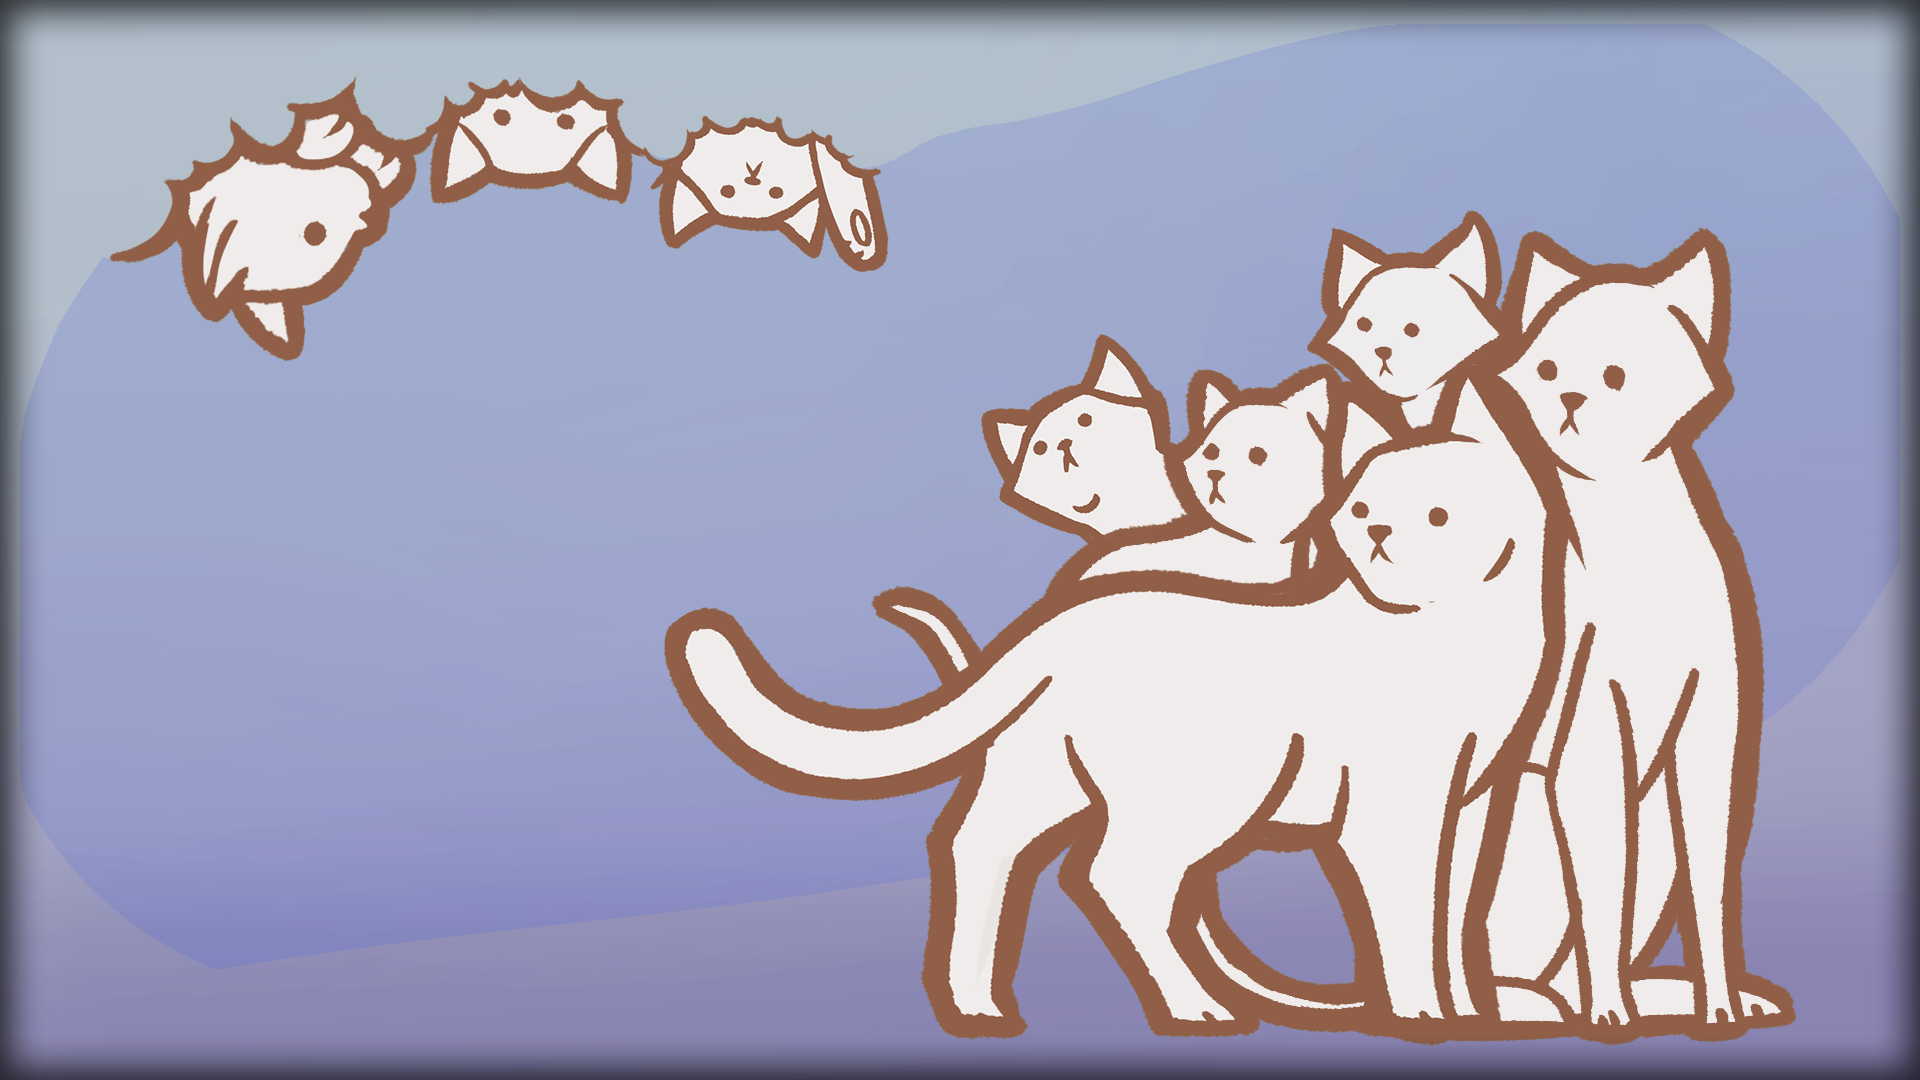 Icon for Found 500 cats